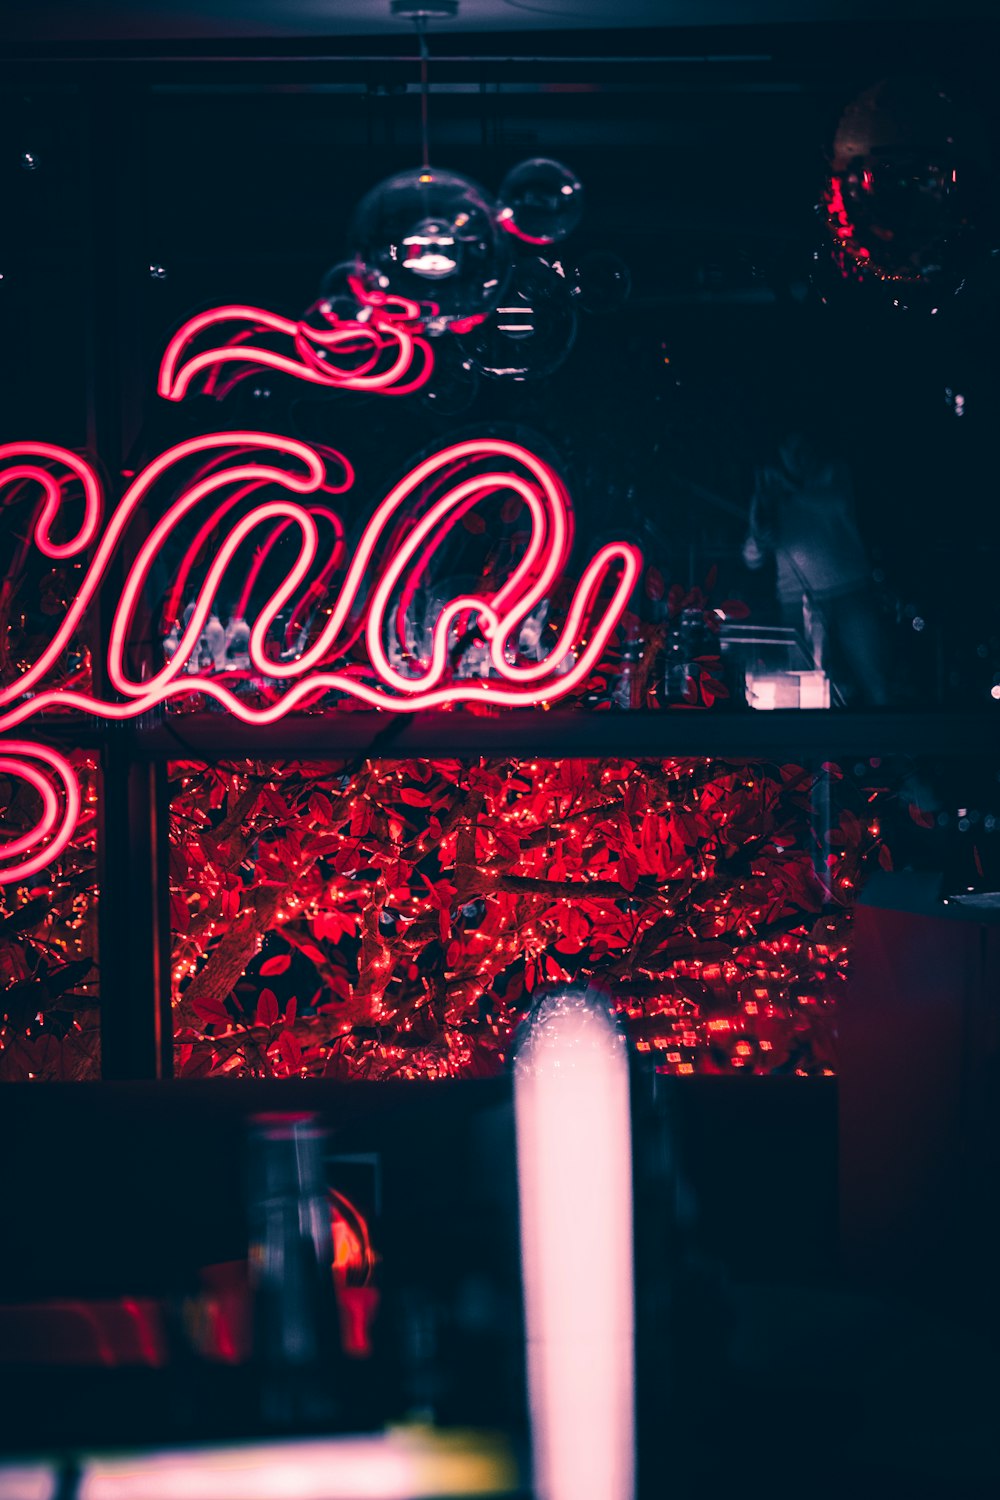 a neon sign in a dark room with red lights